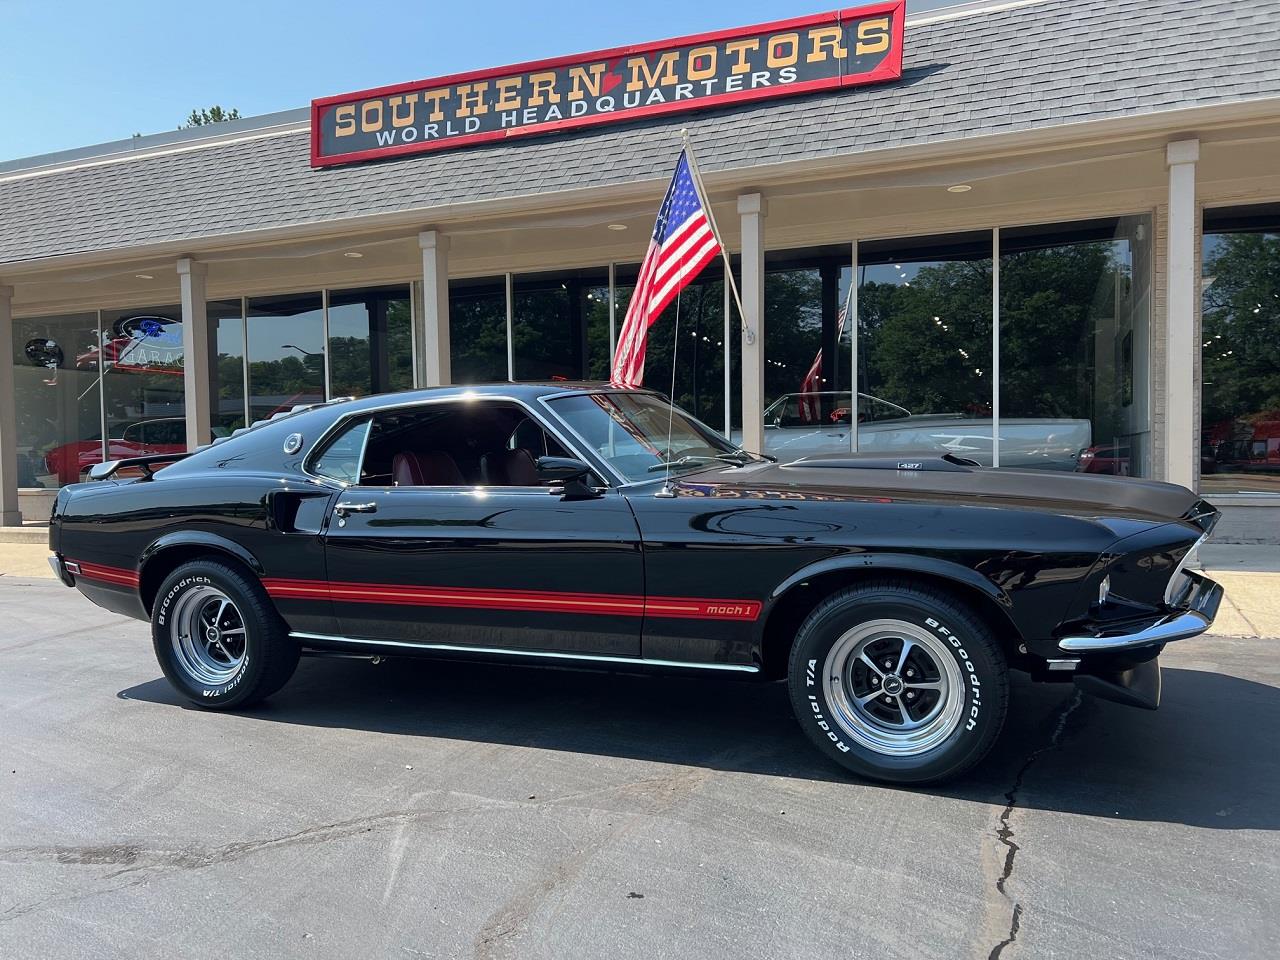 For Sale: 1969 Ford Mustang Mach 1 in Clarkston, Michigan for sale in Clarkston, MI